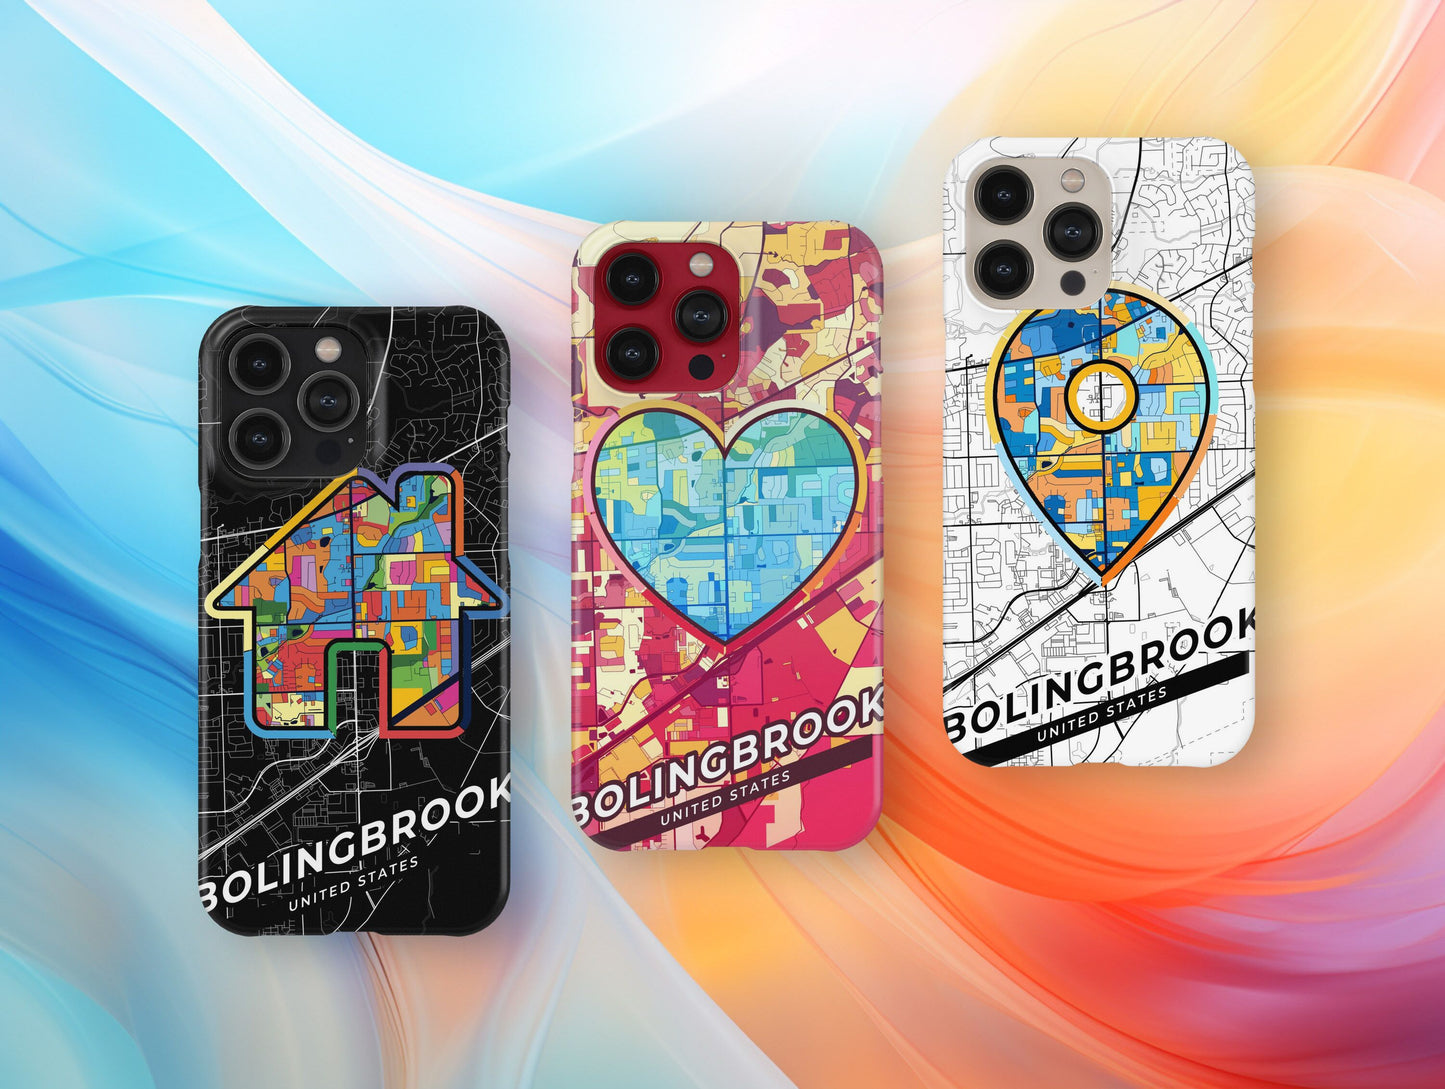 Bolingbrook Illinois slim phone case with colorful icon. Birthday, wedding or housewarming gift. Couple match cases.